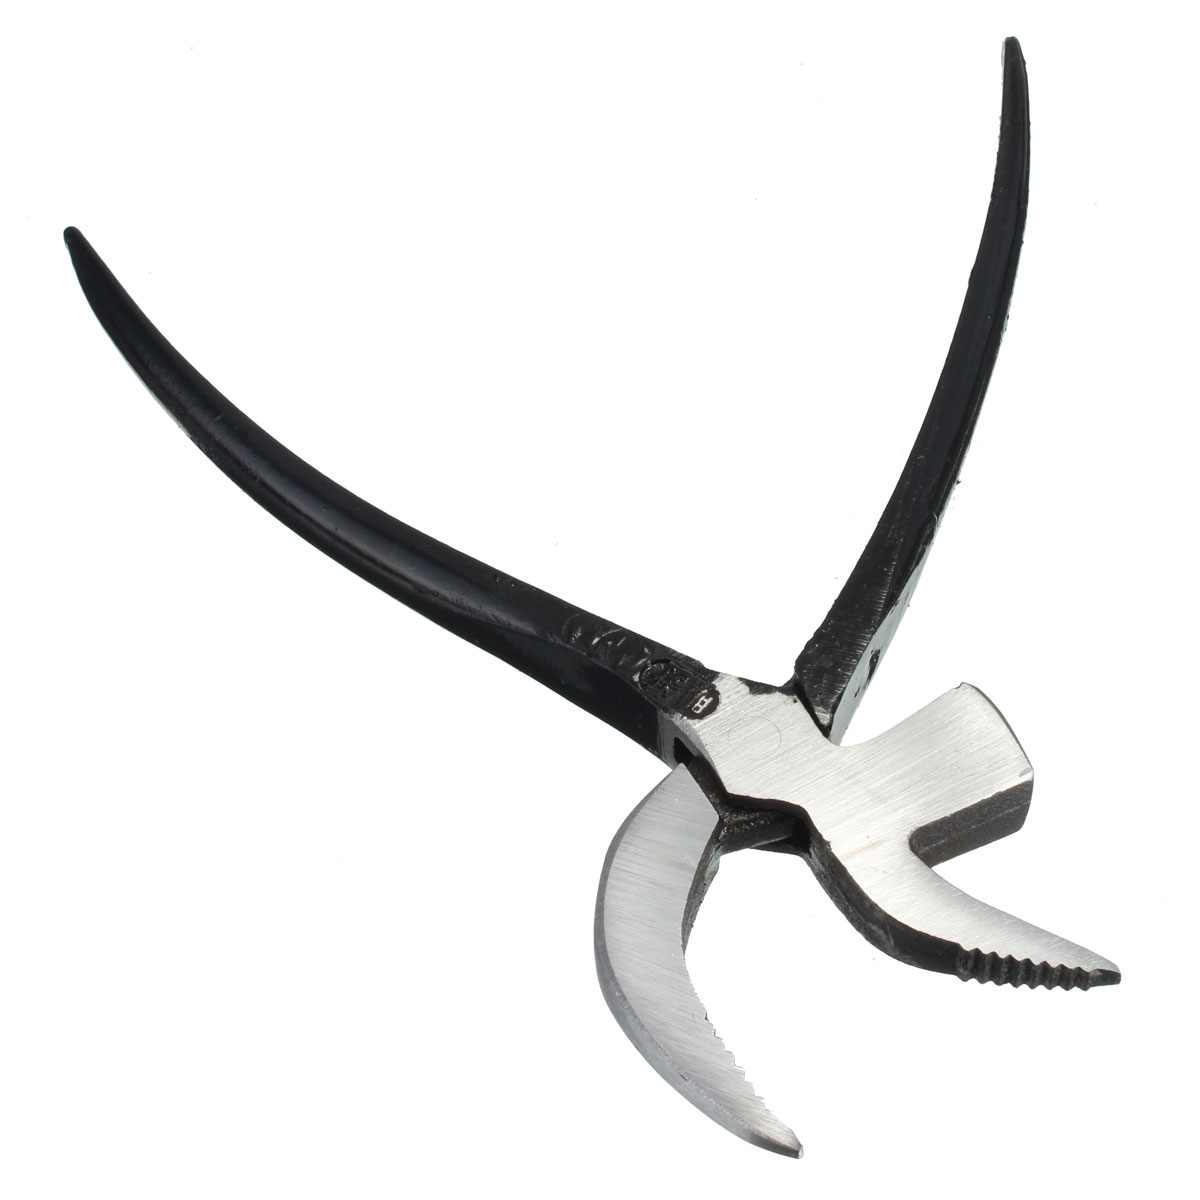 Metal-Cobbler-Pliers-Pincers-for-Shoemaking-Leather-Craft-Leather-DIY-Working-Tool-1021877